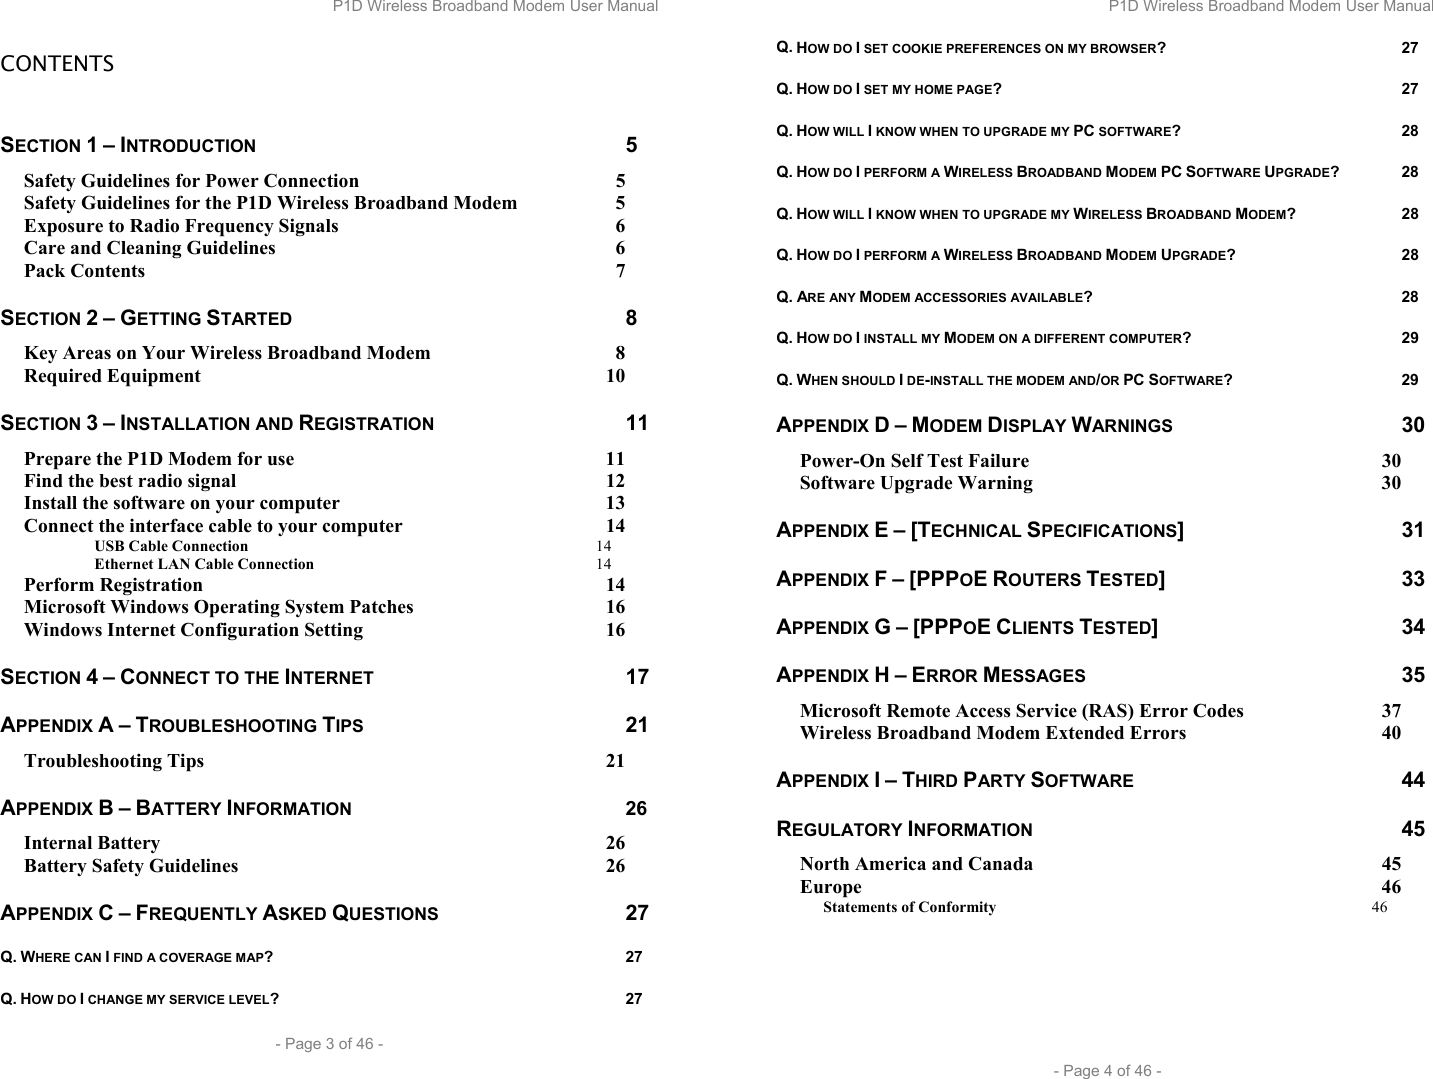 P1D Wireless Broadband Modem User Manual  - Page 3 of 46 -  CONTENTS  SECTION 1 – INTRODUCTION 5 Safety Guidelines for Power Connection  5 Safety Guidelines for the P1D Wireless Broadband Modem  5 Exposure to Radio Frequency Signals  6 Care and Cleaning Guidelines  6 Pack Contents  7 SECTION 2 – GETTING STARTED 8 Key Areas on Your Wireless Broadband Modem  8 Required Equipment  10 SECTION 3 – INSTALLATION AND REGISTRATION 11 Prepare the P1D Modem for use  11 Find the best radio signal  12 Install the software on your computer  13 Connect the interface cable to your computer  14  USB Cable Connection 14  Ethernet LAN Cable Connection 14 Perform Registration  14 Microsoft Windows Operating System Patches  16 Windows Internet Configuration Setting  16 SECTION 4 – CONNECT TO THE INTERNET 17 APPENDIX A – TROUBLESHOOTING TIPS 21 Troubleshooting Tips  21 APPENDIX B – BATTERY INFORMATION 26 Internal Battery  26 Battery Safety Guidelines  26 APPENDIX C – FREQUENTLY ASKED QUESTIONS 27 Q. WHERE CAN I FIND A COVERAGE MAP? 27 Q. HOW DO I CHANGE MY SERVICE LEVEL? 27 P1D Wireless Broadband Modem User Manual  - Page 4 of 46 - Q. HOW DO I SET COOKIE PREFERENCES ON MY BROWSER? 27 Q. HOW DO I SET MY HOME PAGE? 27 Q. HOW WILL I KNOW WHEN TO UPGRADE MY PC SOFTWARE? 28 Q. HOW DO I PERFORM A WIRELESS BROADBAND MODEM PC SOFTWARE UPGRADE? 28 Q. HOW WILL I KNOW WHEN TO UPGRADE MY WIRELESS BROADBAND MODEM? 28 Q. HOW DO I PERFORM A WIRELESS BROADBAND MODEM UPGRADE? 28 Q. ARE ANY MODEM ACCESSORIES AVAILABLE? 28 Q. HOW DO I INSTALL MY MODEM ON A DIFFERENT COMPUTER? 29 Q. WHEN SHOULD I DE-INSTALL THE MODEM AND/OR PC SOFTWARE? 29 APPENDIX D – MODEM DISPLAY WARNINGS 30 Power-On Self Test Failure  30 Software Upgrade Warning  30 APPENDIX E – [TECHNICAL SPECIFICATIONS] 31 APPENDIX F – [PPPOE ROUTERS TESTED] 33 APPENDIX G – [PPPOE CLIENTS TESTED] 34 APPENDIX H – ERROR MESSAGES 35 Microsoft Remote Access Service (RAS) Error Codes  37 Wireless Broadband Modem Extended Errors  40 APPENDIX I – THIRD PARTY SOFTWARE 44 REGULATORY INFORMATION 45 North America and Canada  45 Europe 46 Statements of Conformity 46    